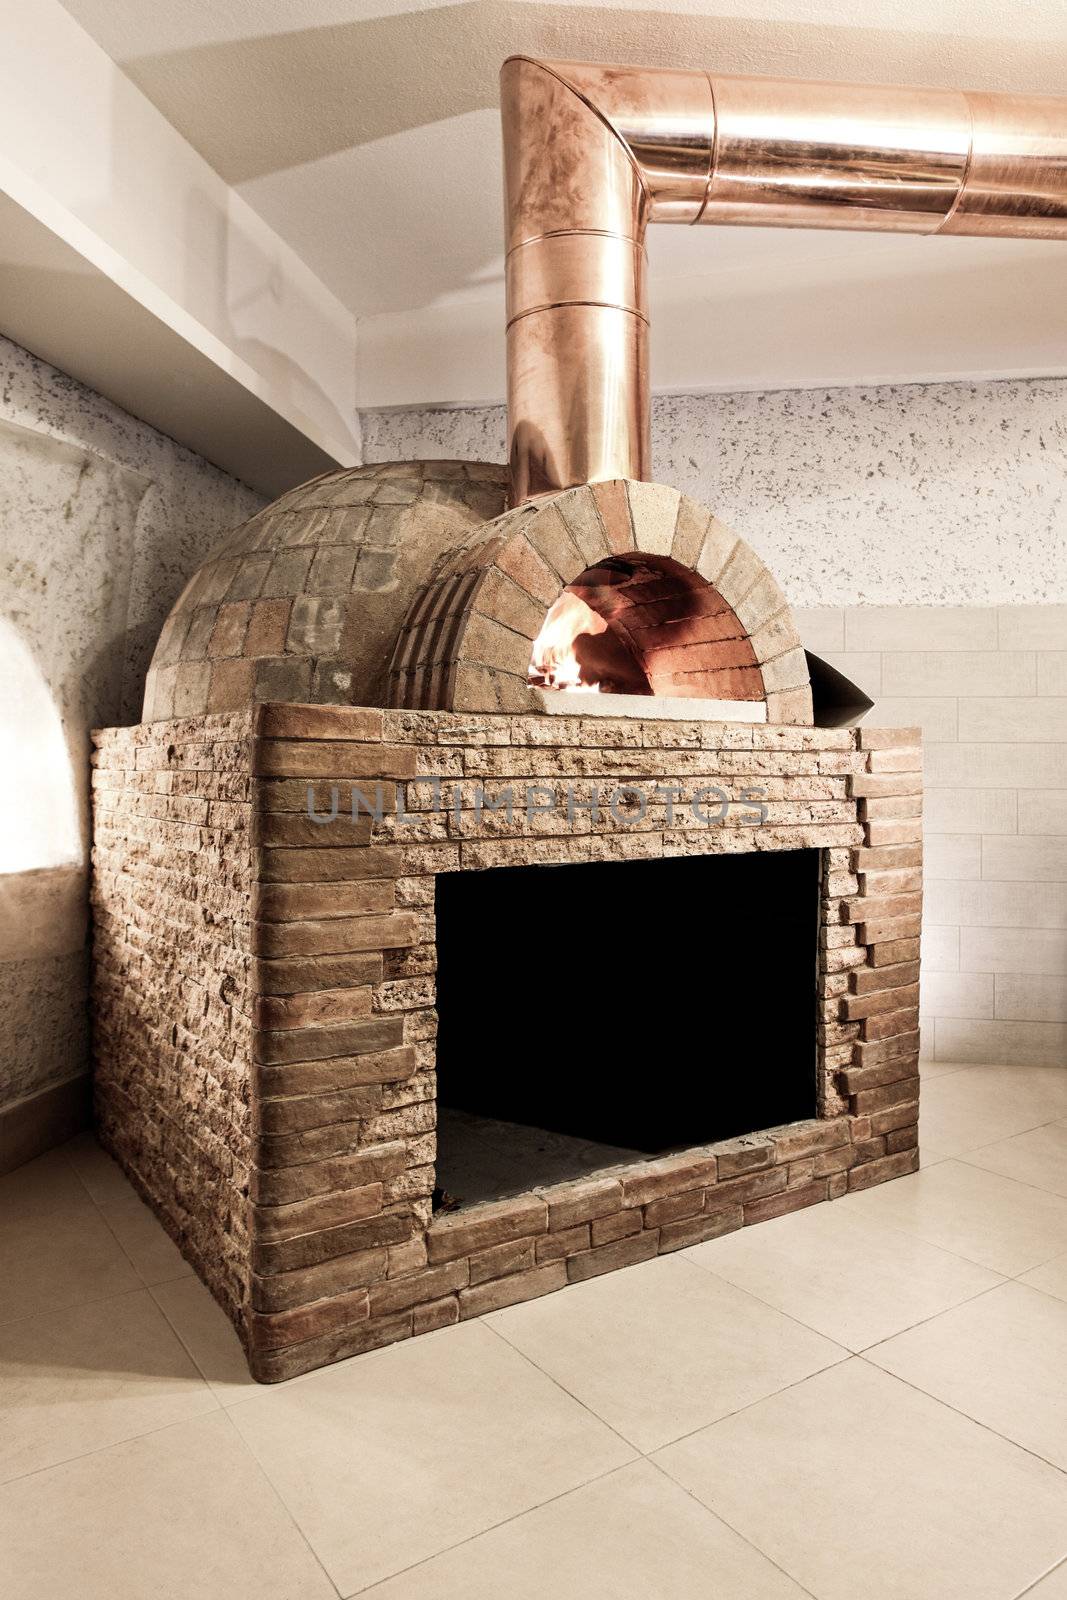 wood fired oven by kokimk